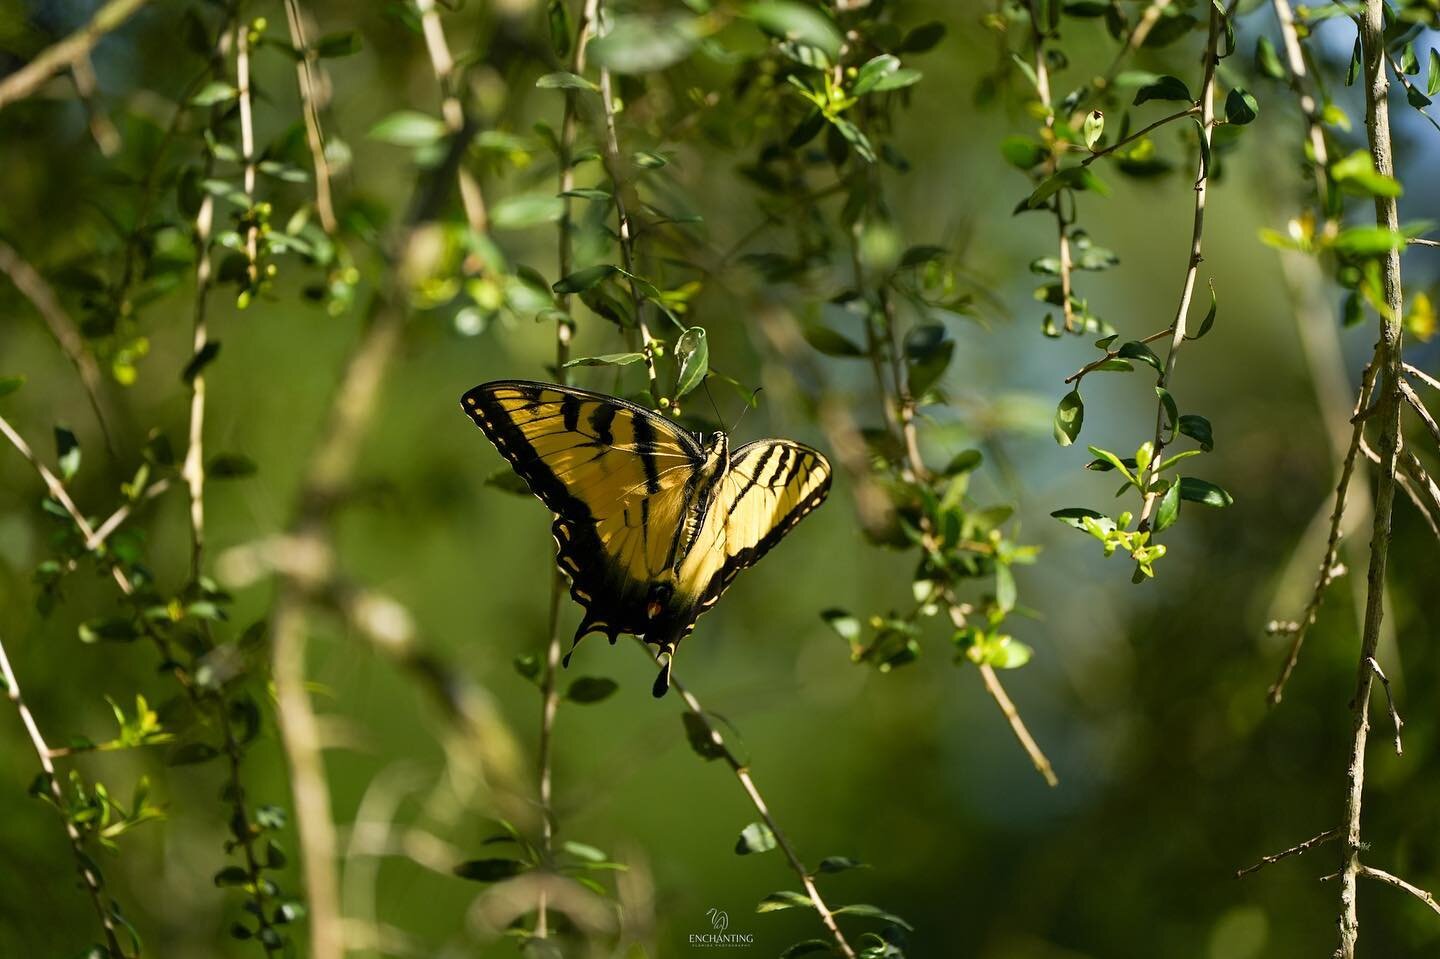 Day 19: Nature #rebelsunitedmay2023potd #rebels_nature #nofeathersfriday 

Floating into Friday like a butterfly&hellip; have a beautiful day! Tiger Swallowtail butterfly 5/3/23 #flstateparks 

#tigerswallowtail #butterflies #naturephotography #butte